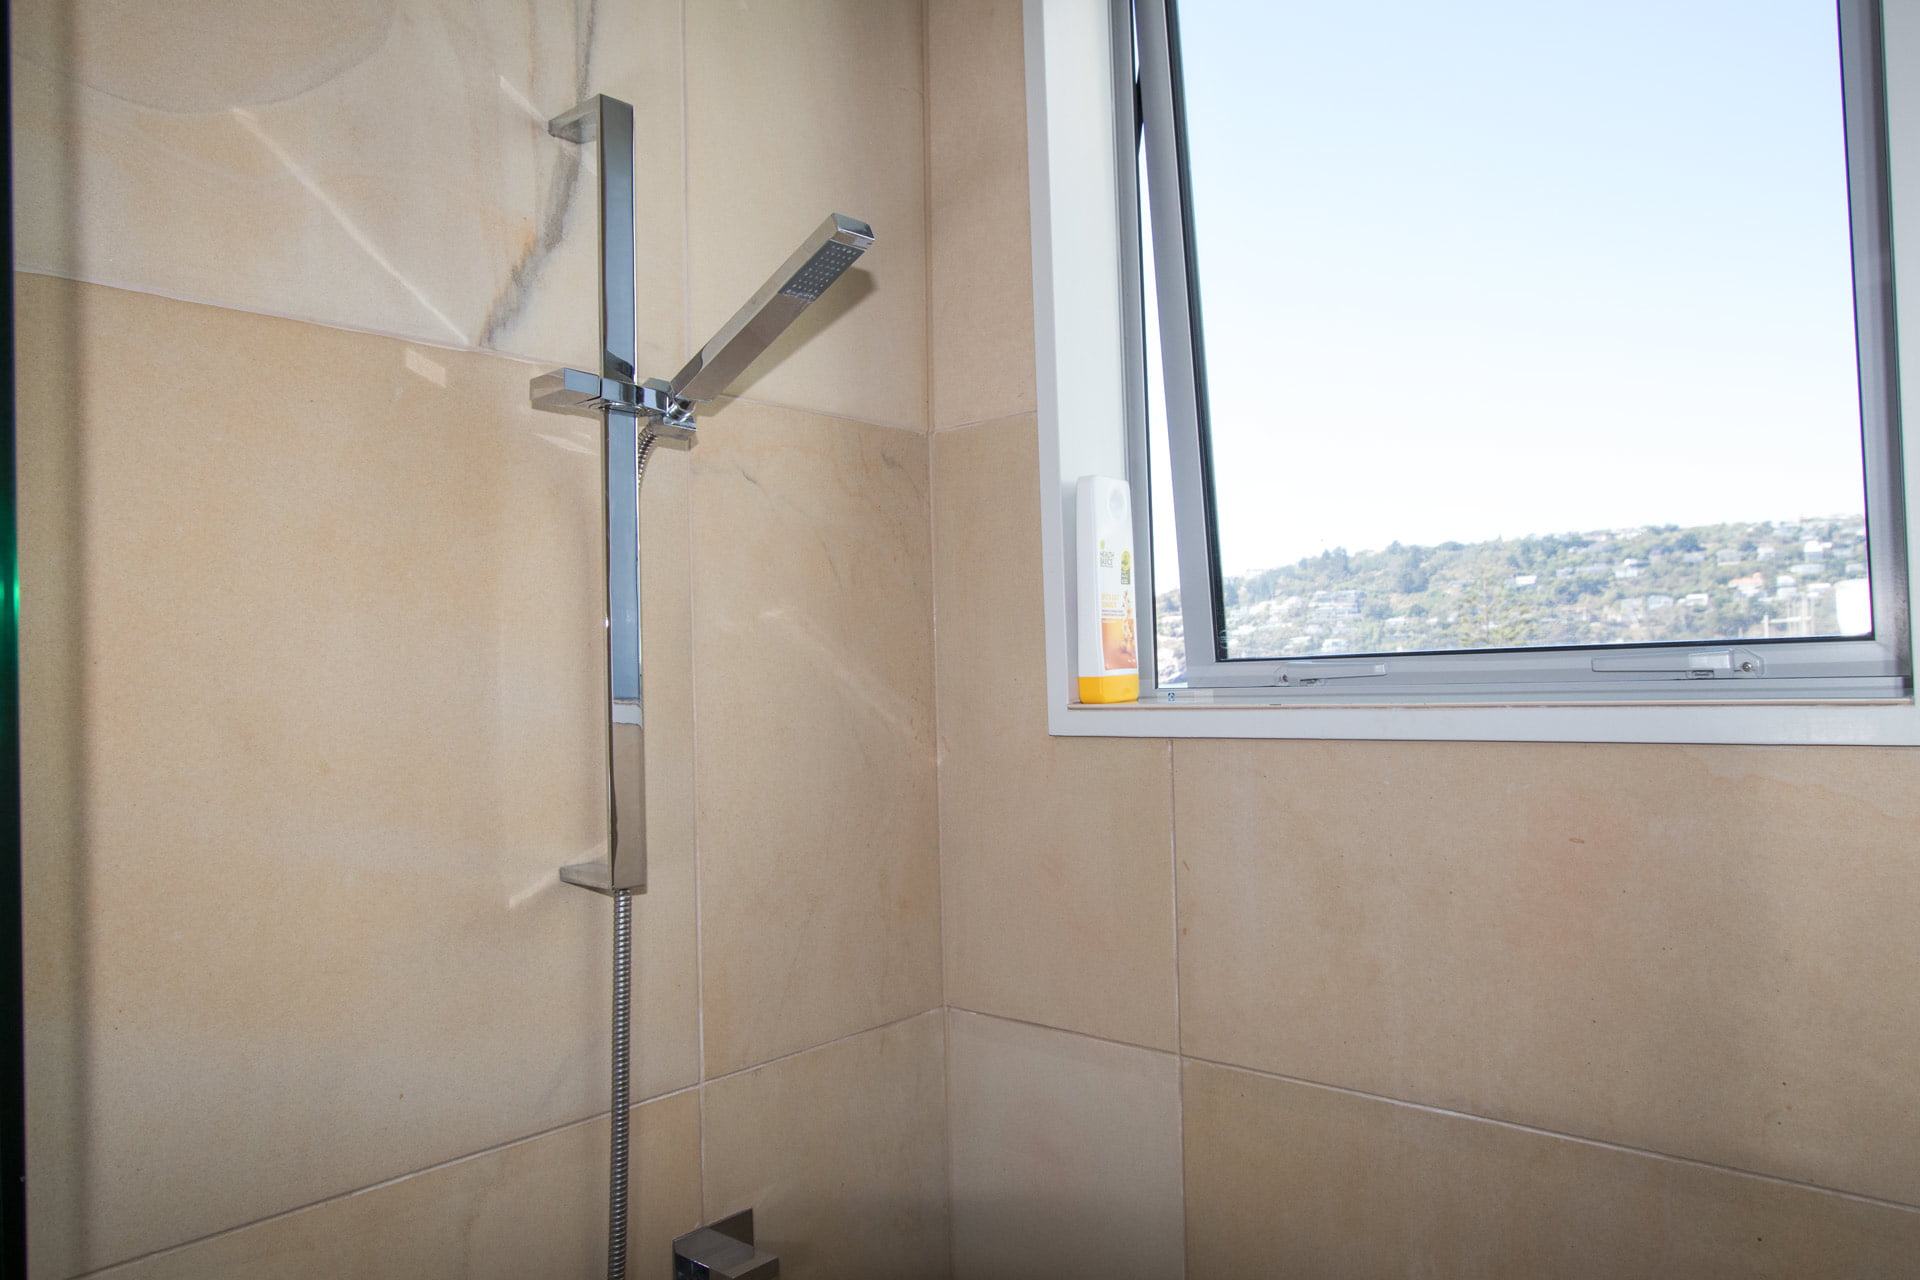 Second ensuite bathroom shower with a view